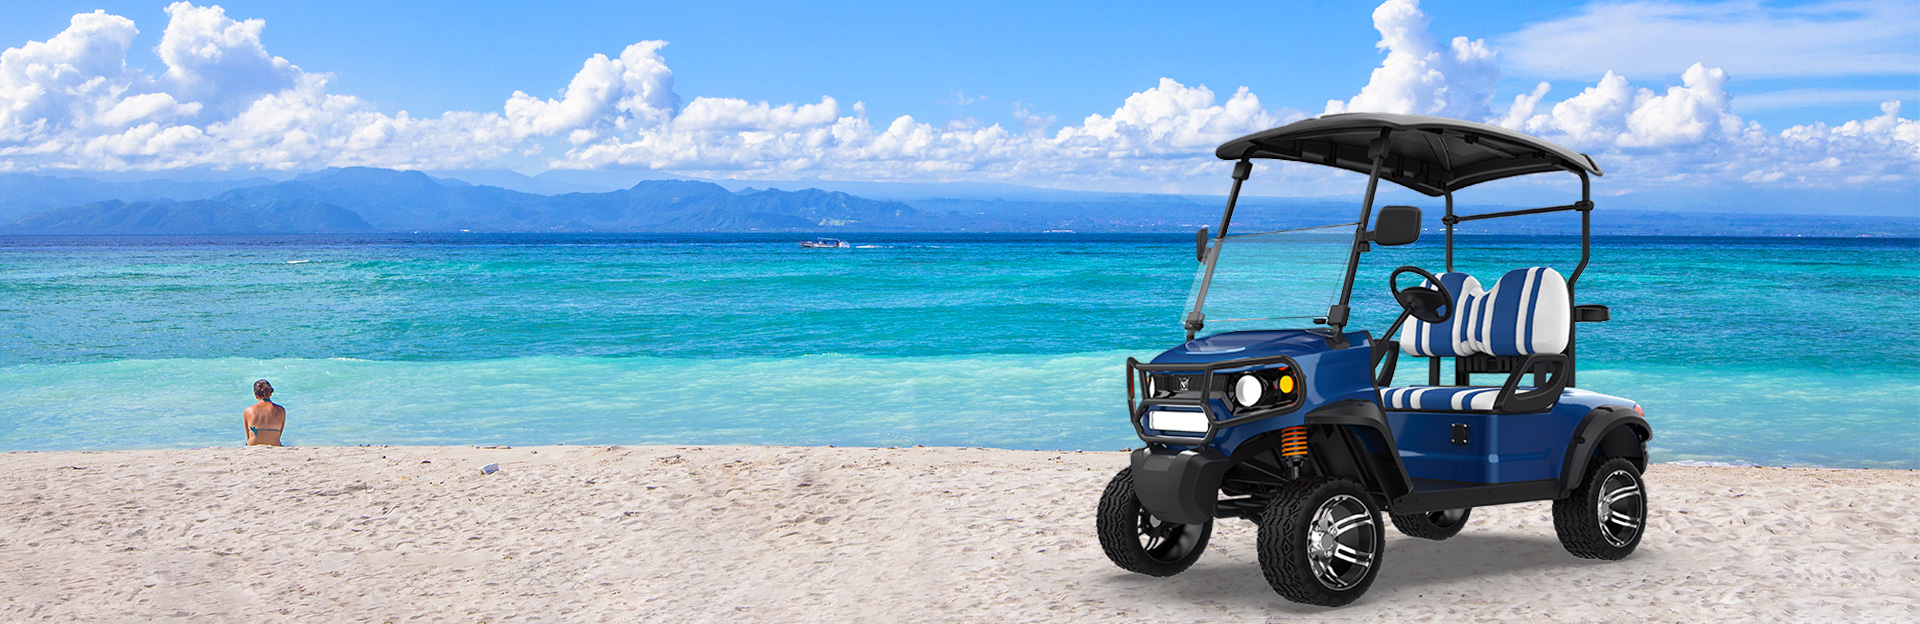 Embark on a Golfing Revolution with Our Ultimate Golf Cart Experience!